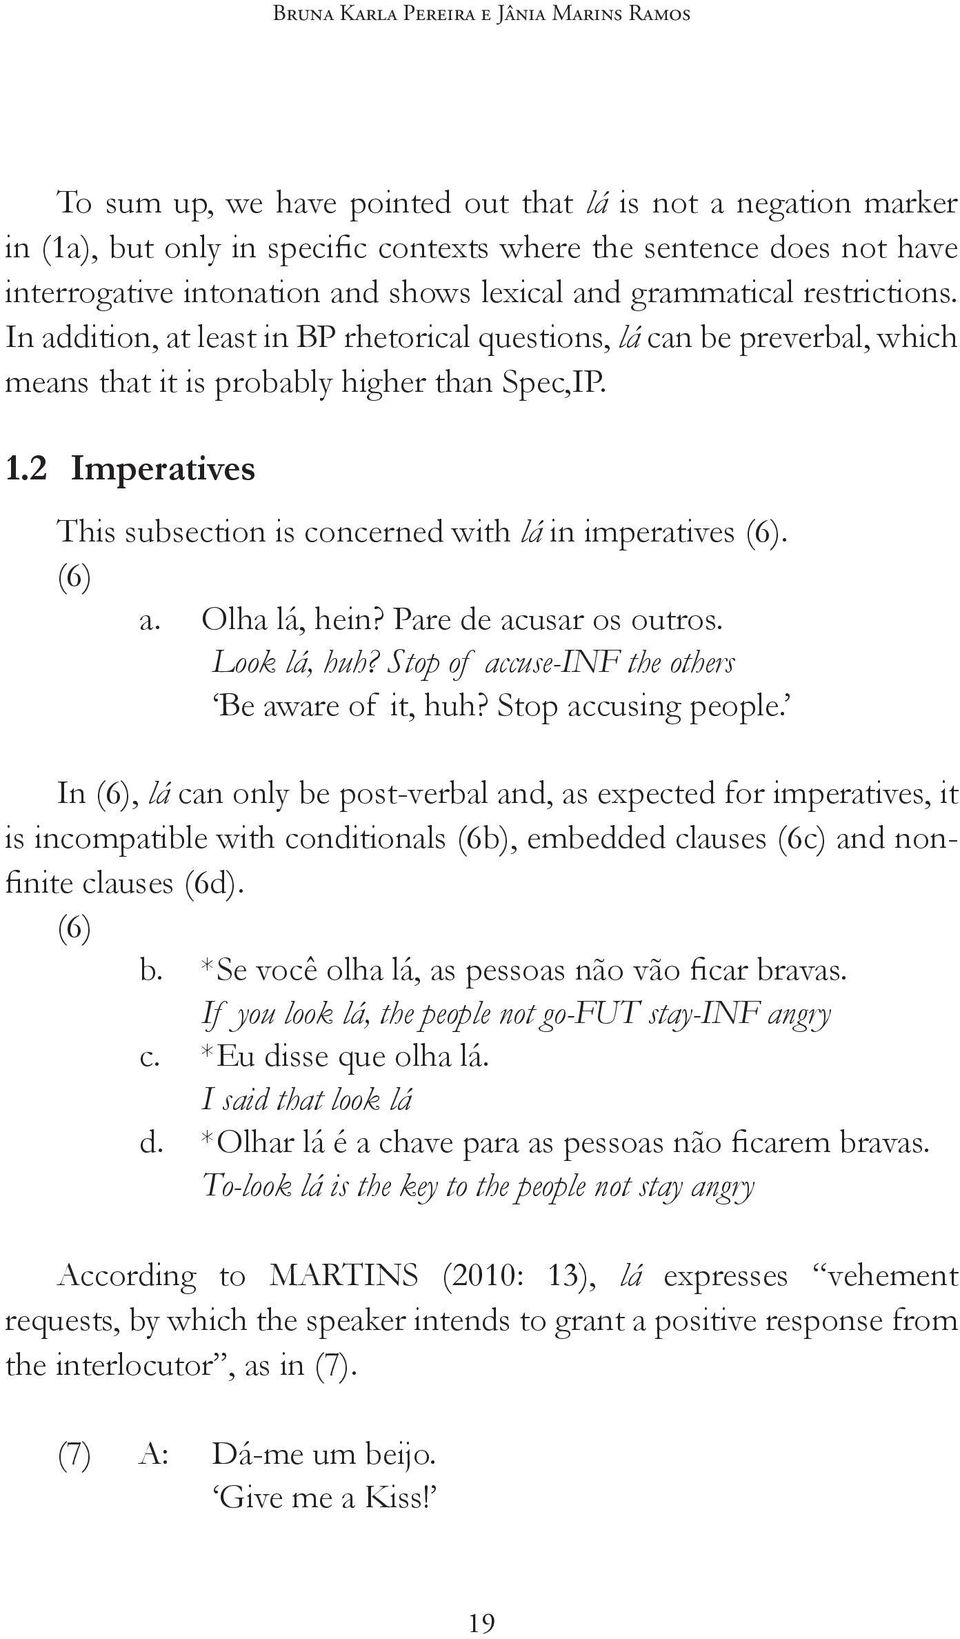 2 Imperatives This subsection is concerned with lá in imperatives (6). (6) a. Olha lá, hein? Pare de acusar os outros. Look lá, huh? Stop of accuse-inf the others Be aware of it, huh?